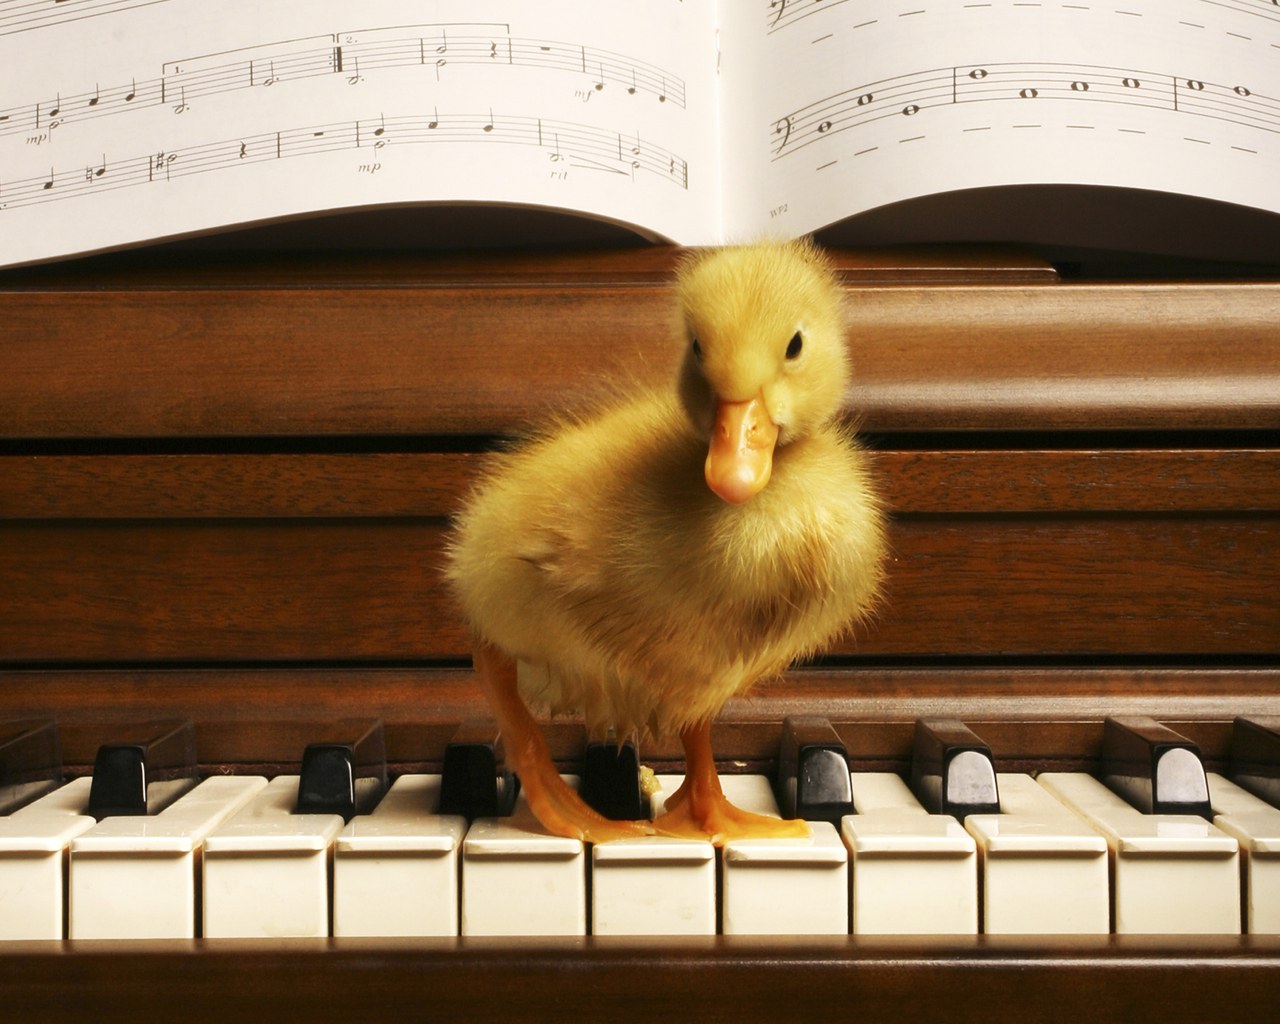 1264144261_1280x1024_a-yellow-duckling-on-a-piano.jpg